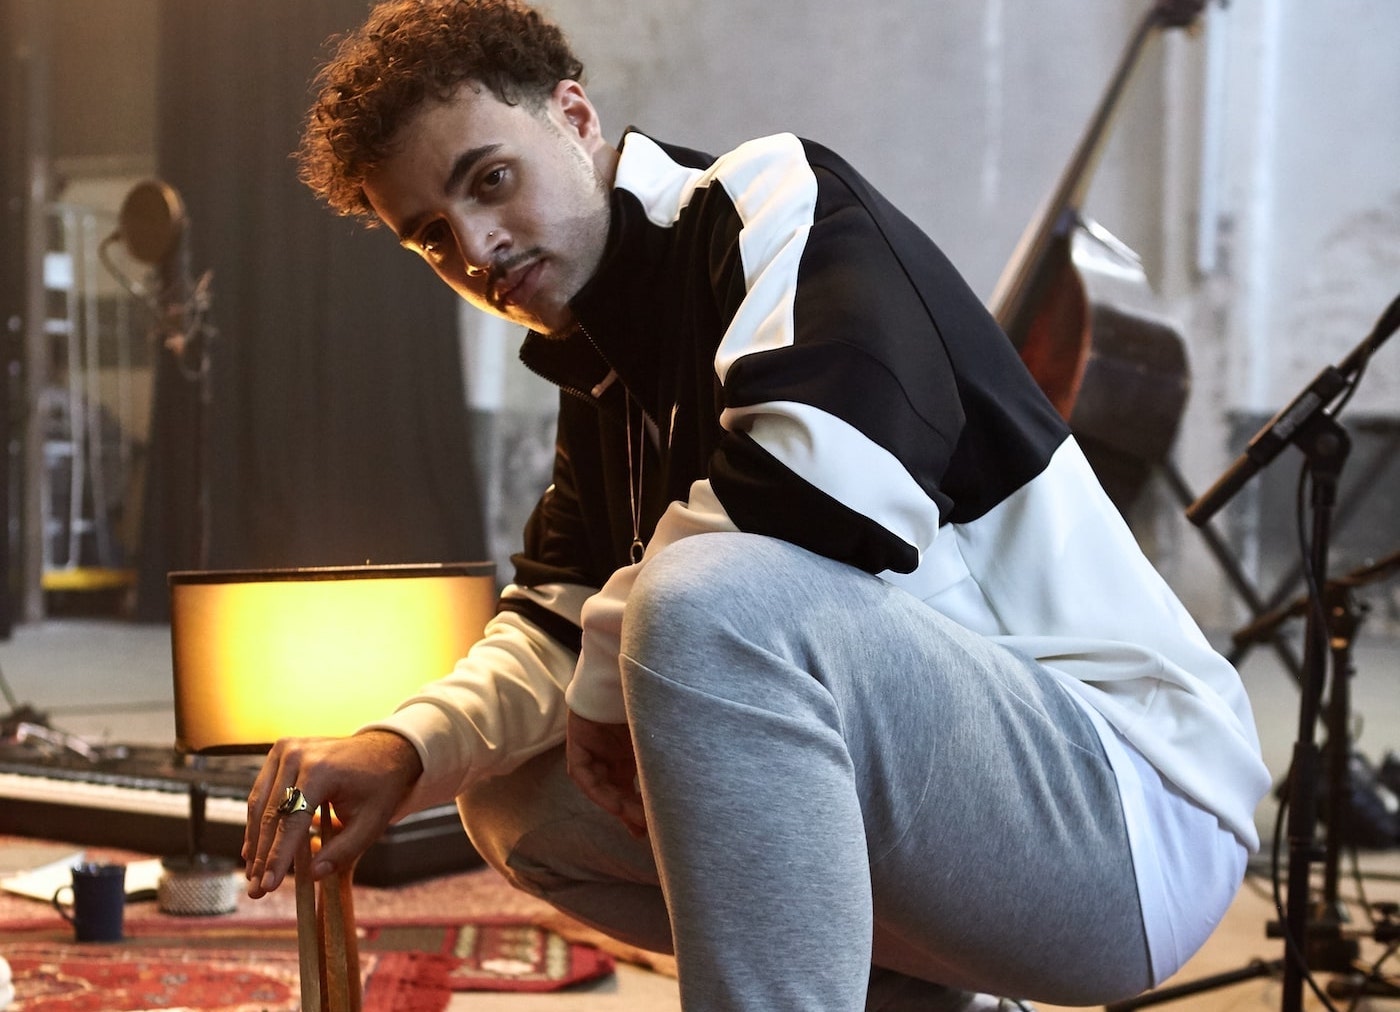 Foot Locker Taps Europes Up And Coming Talent For New Campaign